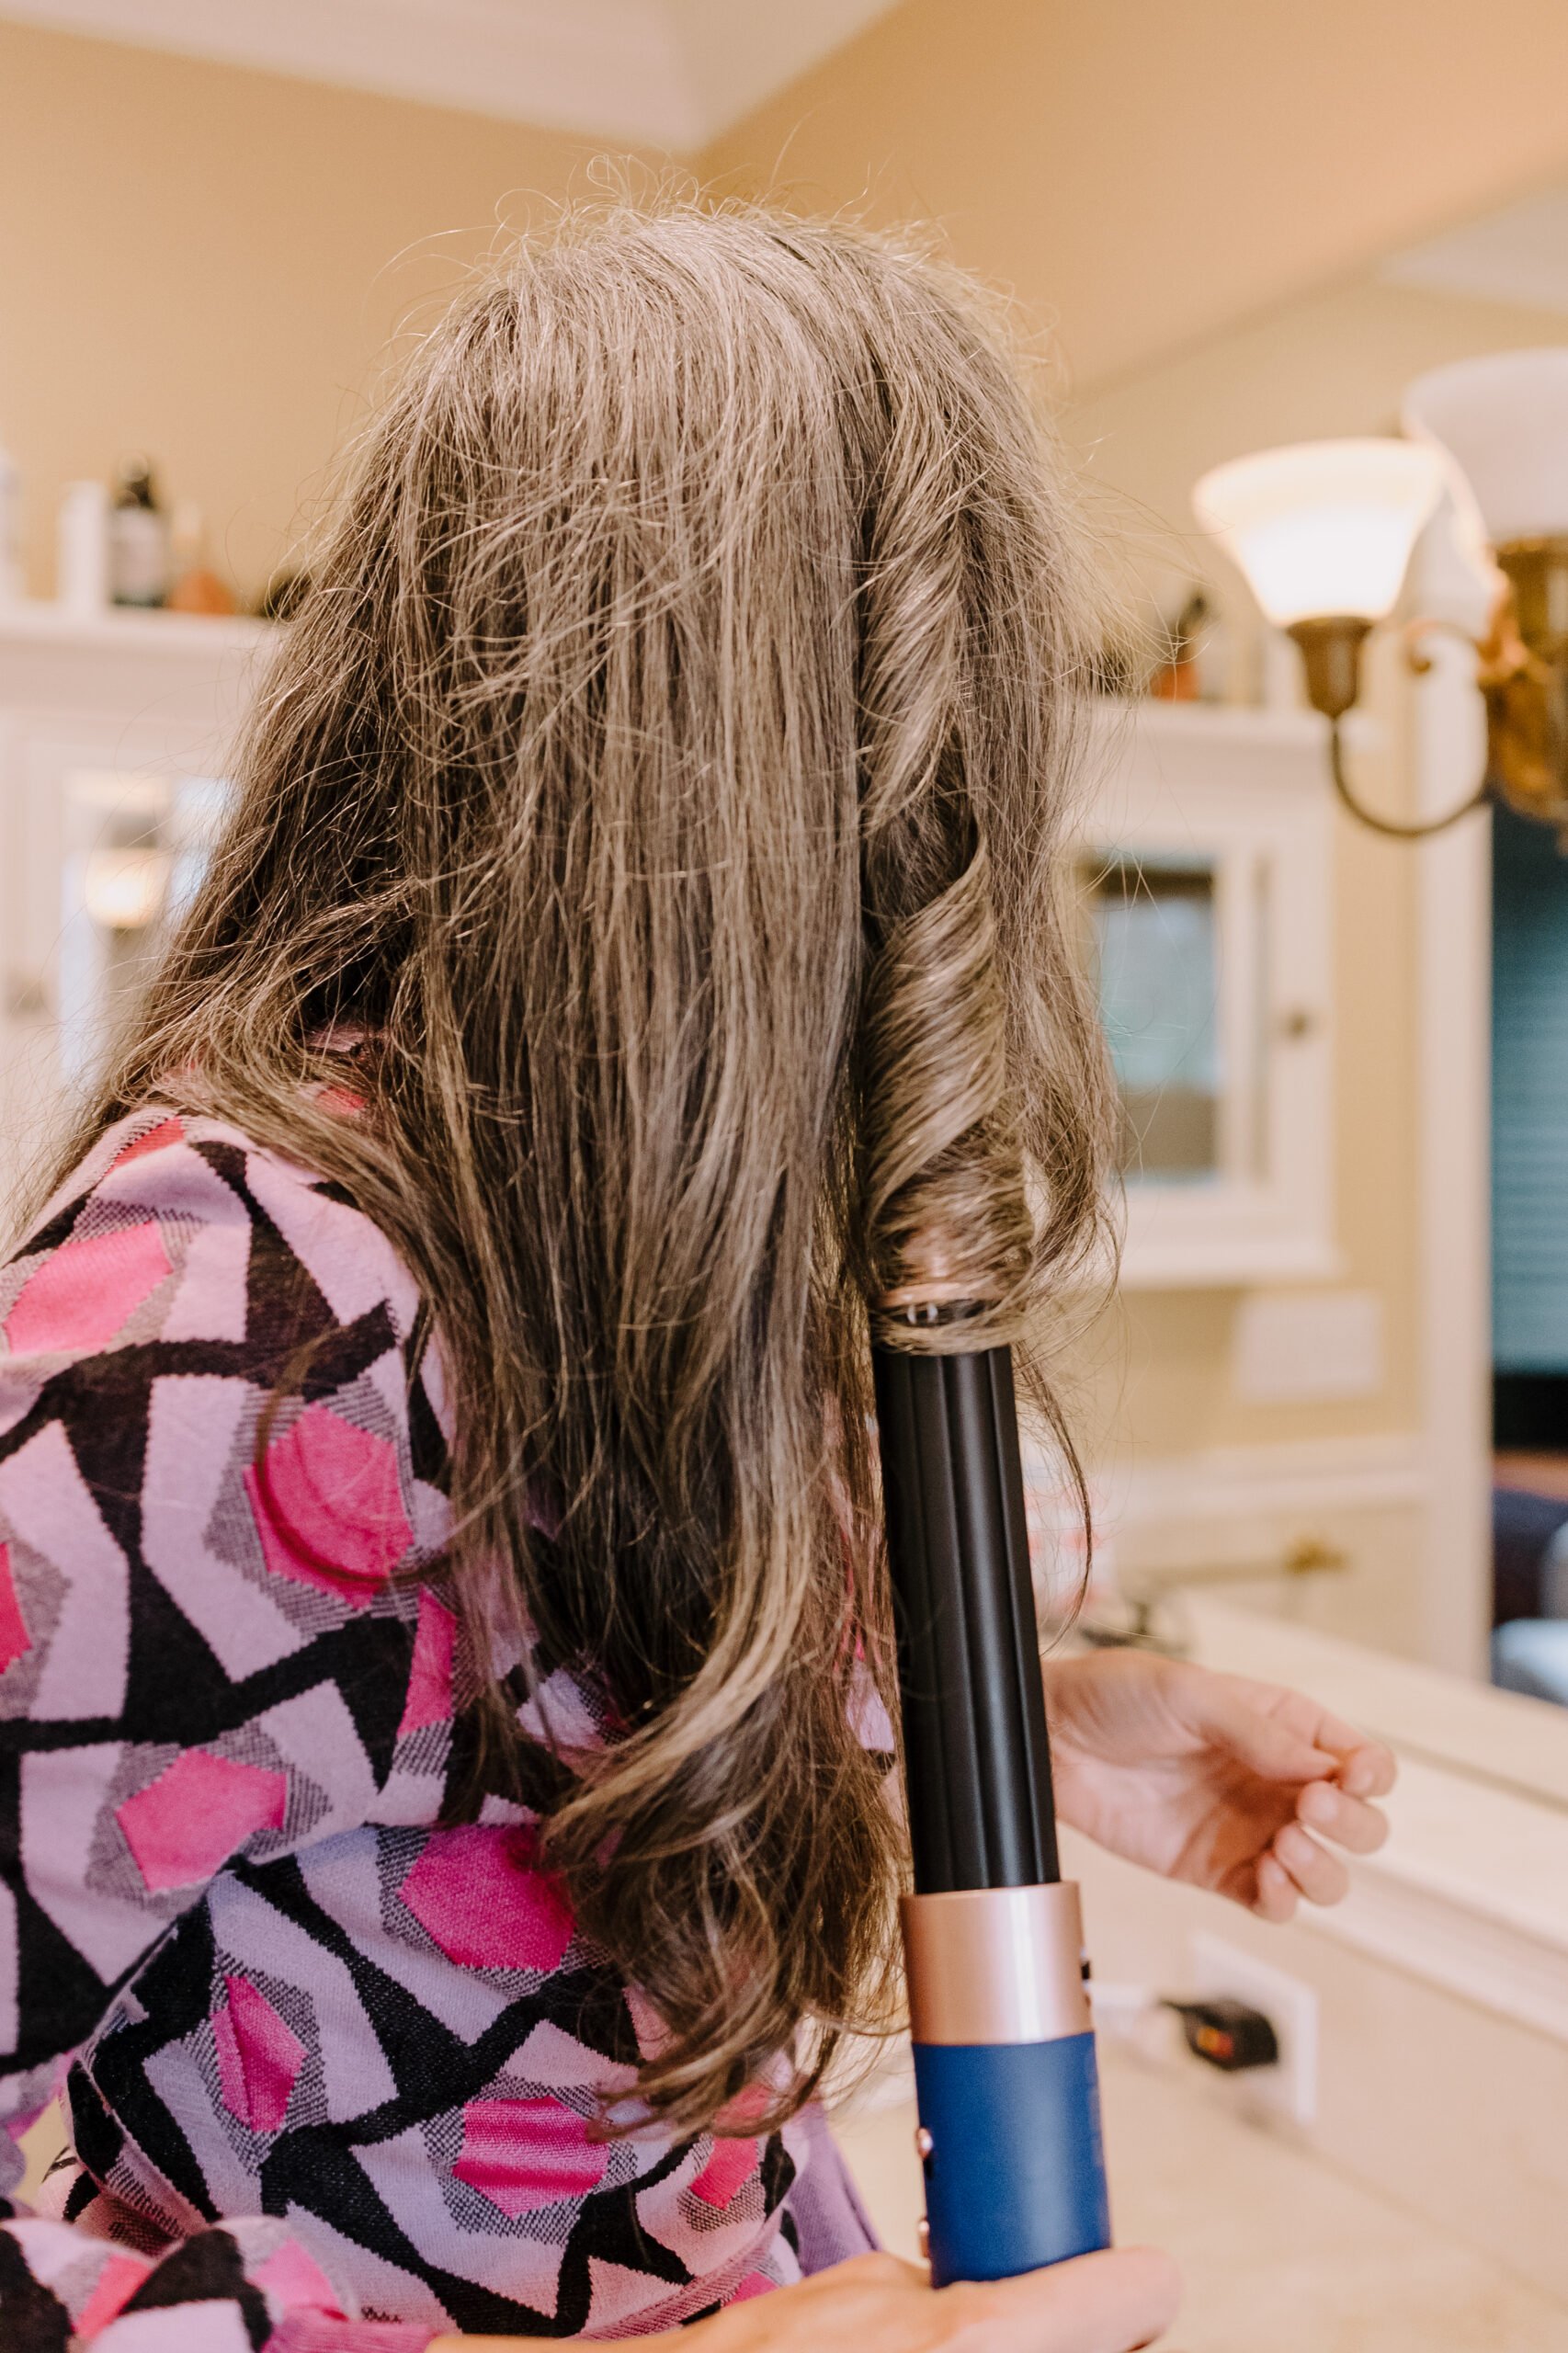 A woman styles her hair with the Dyson Airwrap.